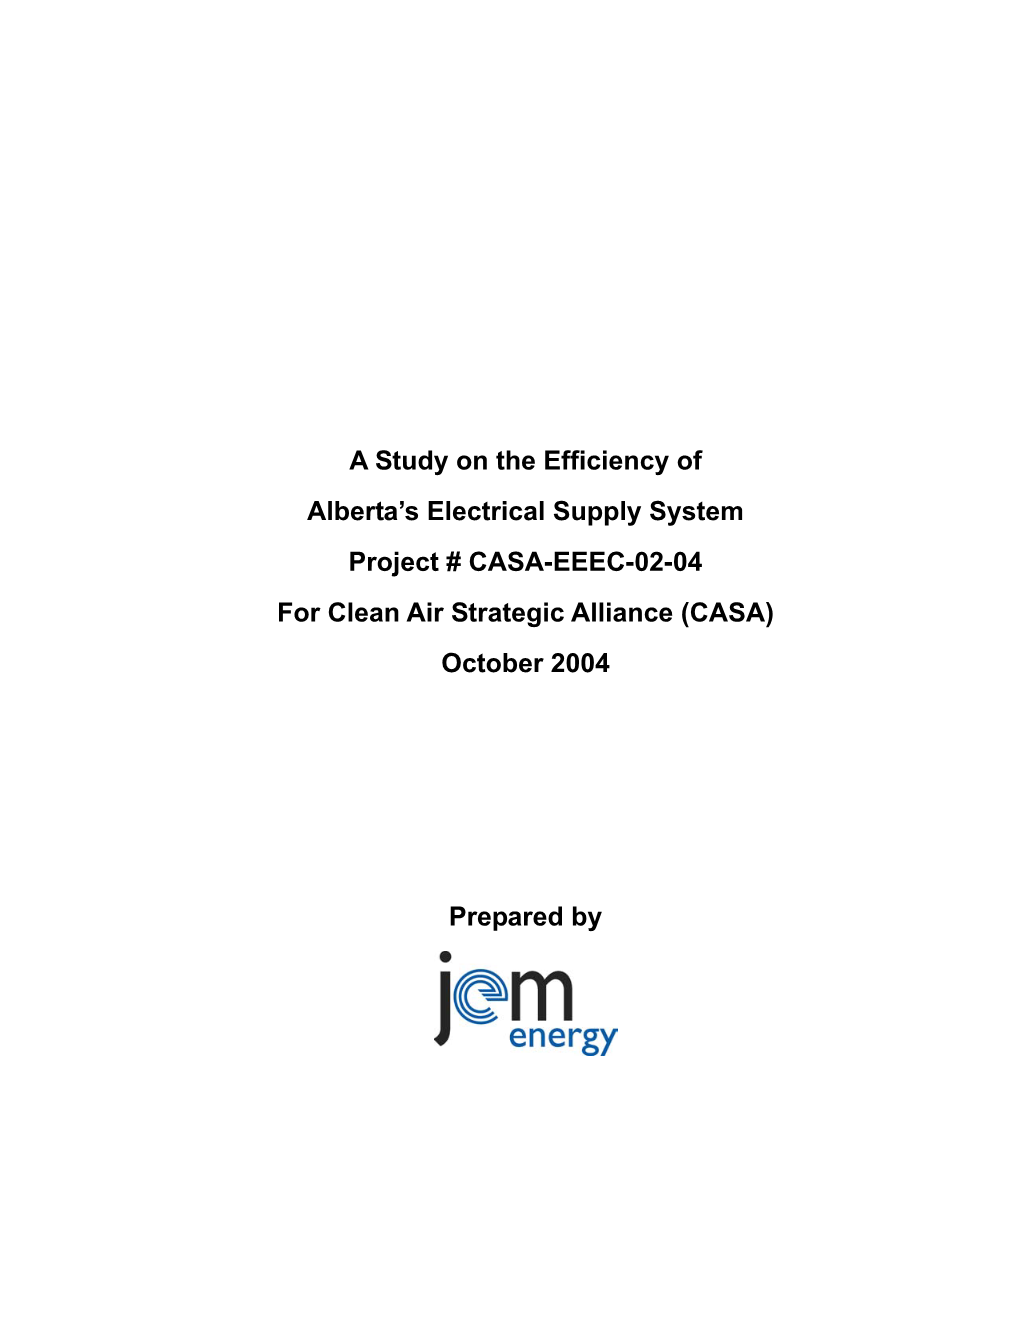 A Study on the Efficiency of Alberta's Electrical Supply System Project